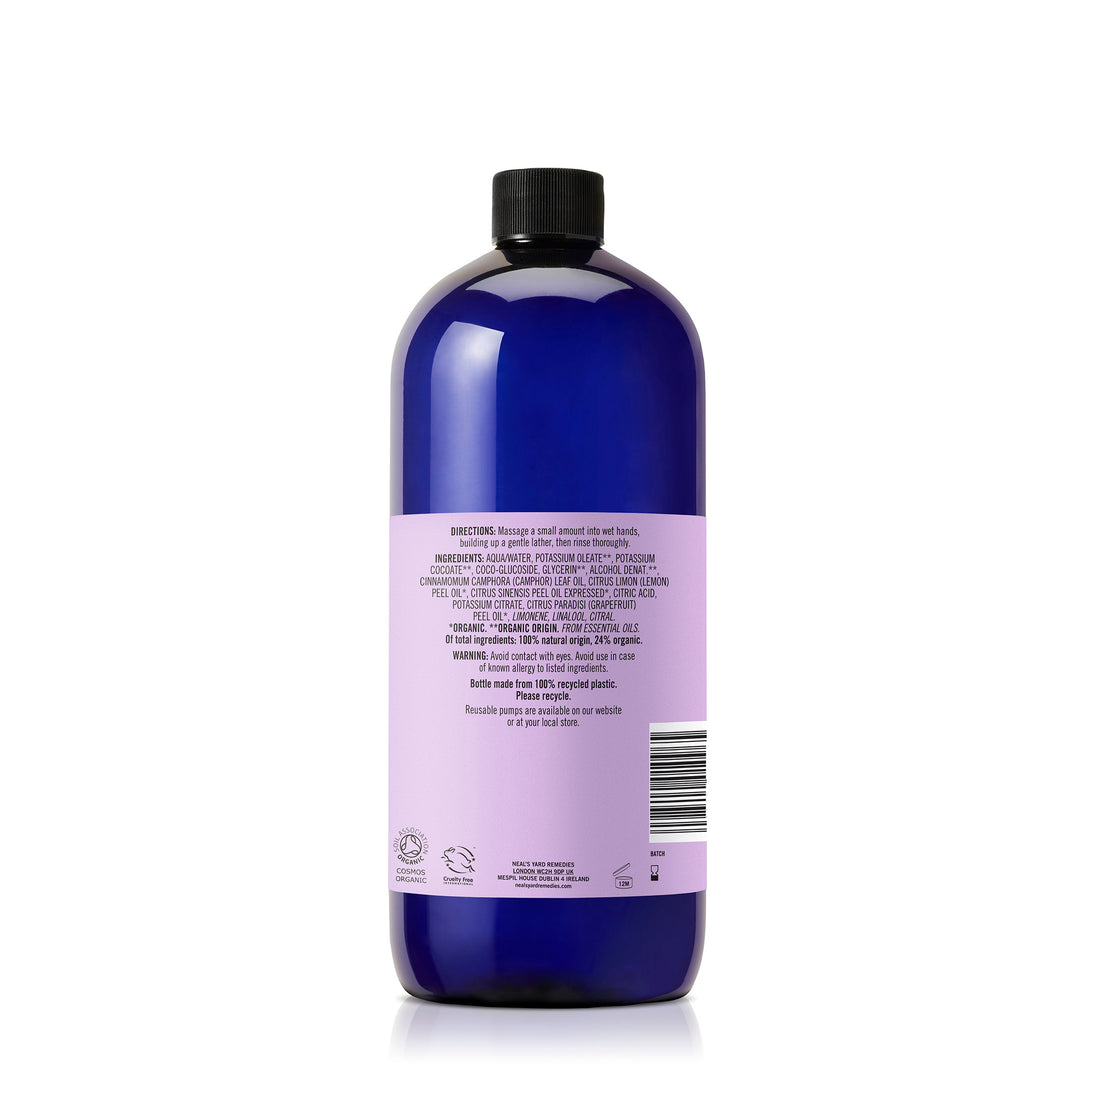 Citrus Hand Wash 950ml (Comes in Clear bottle)